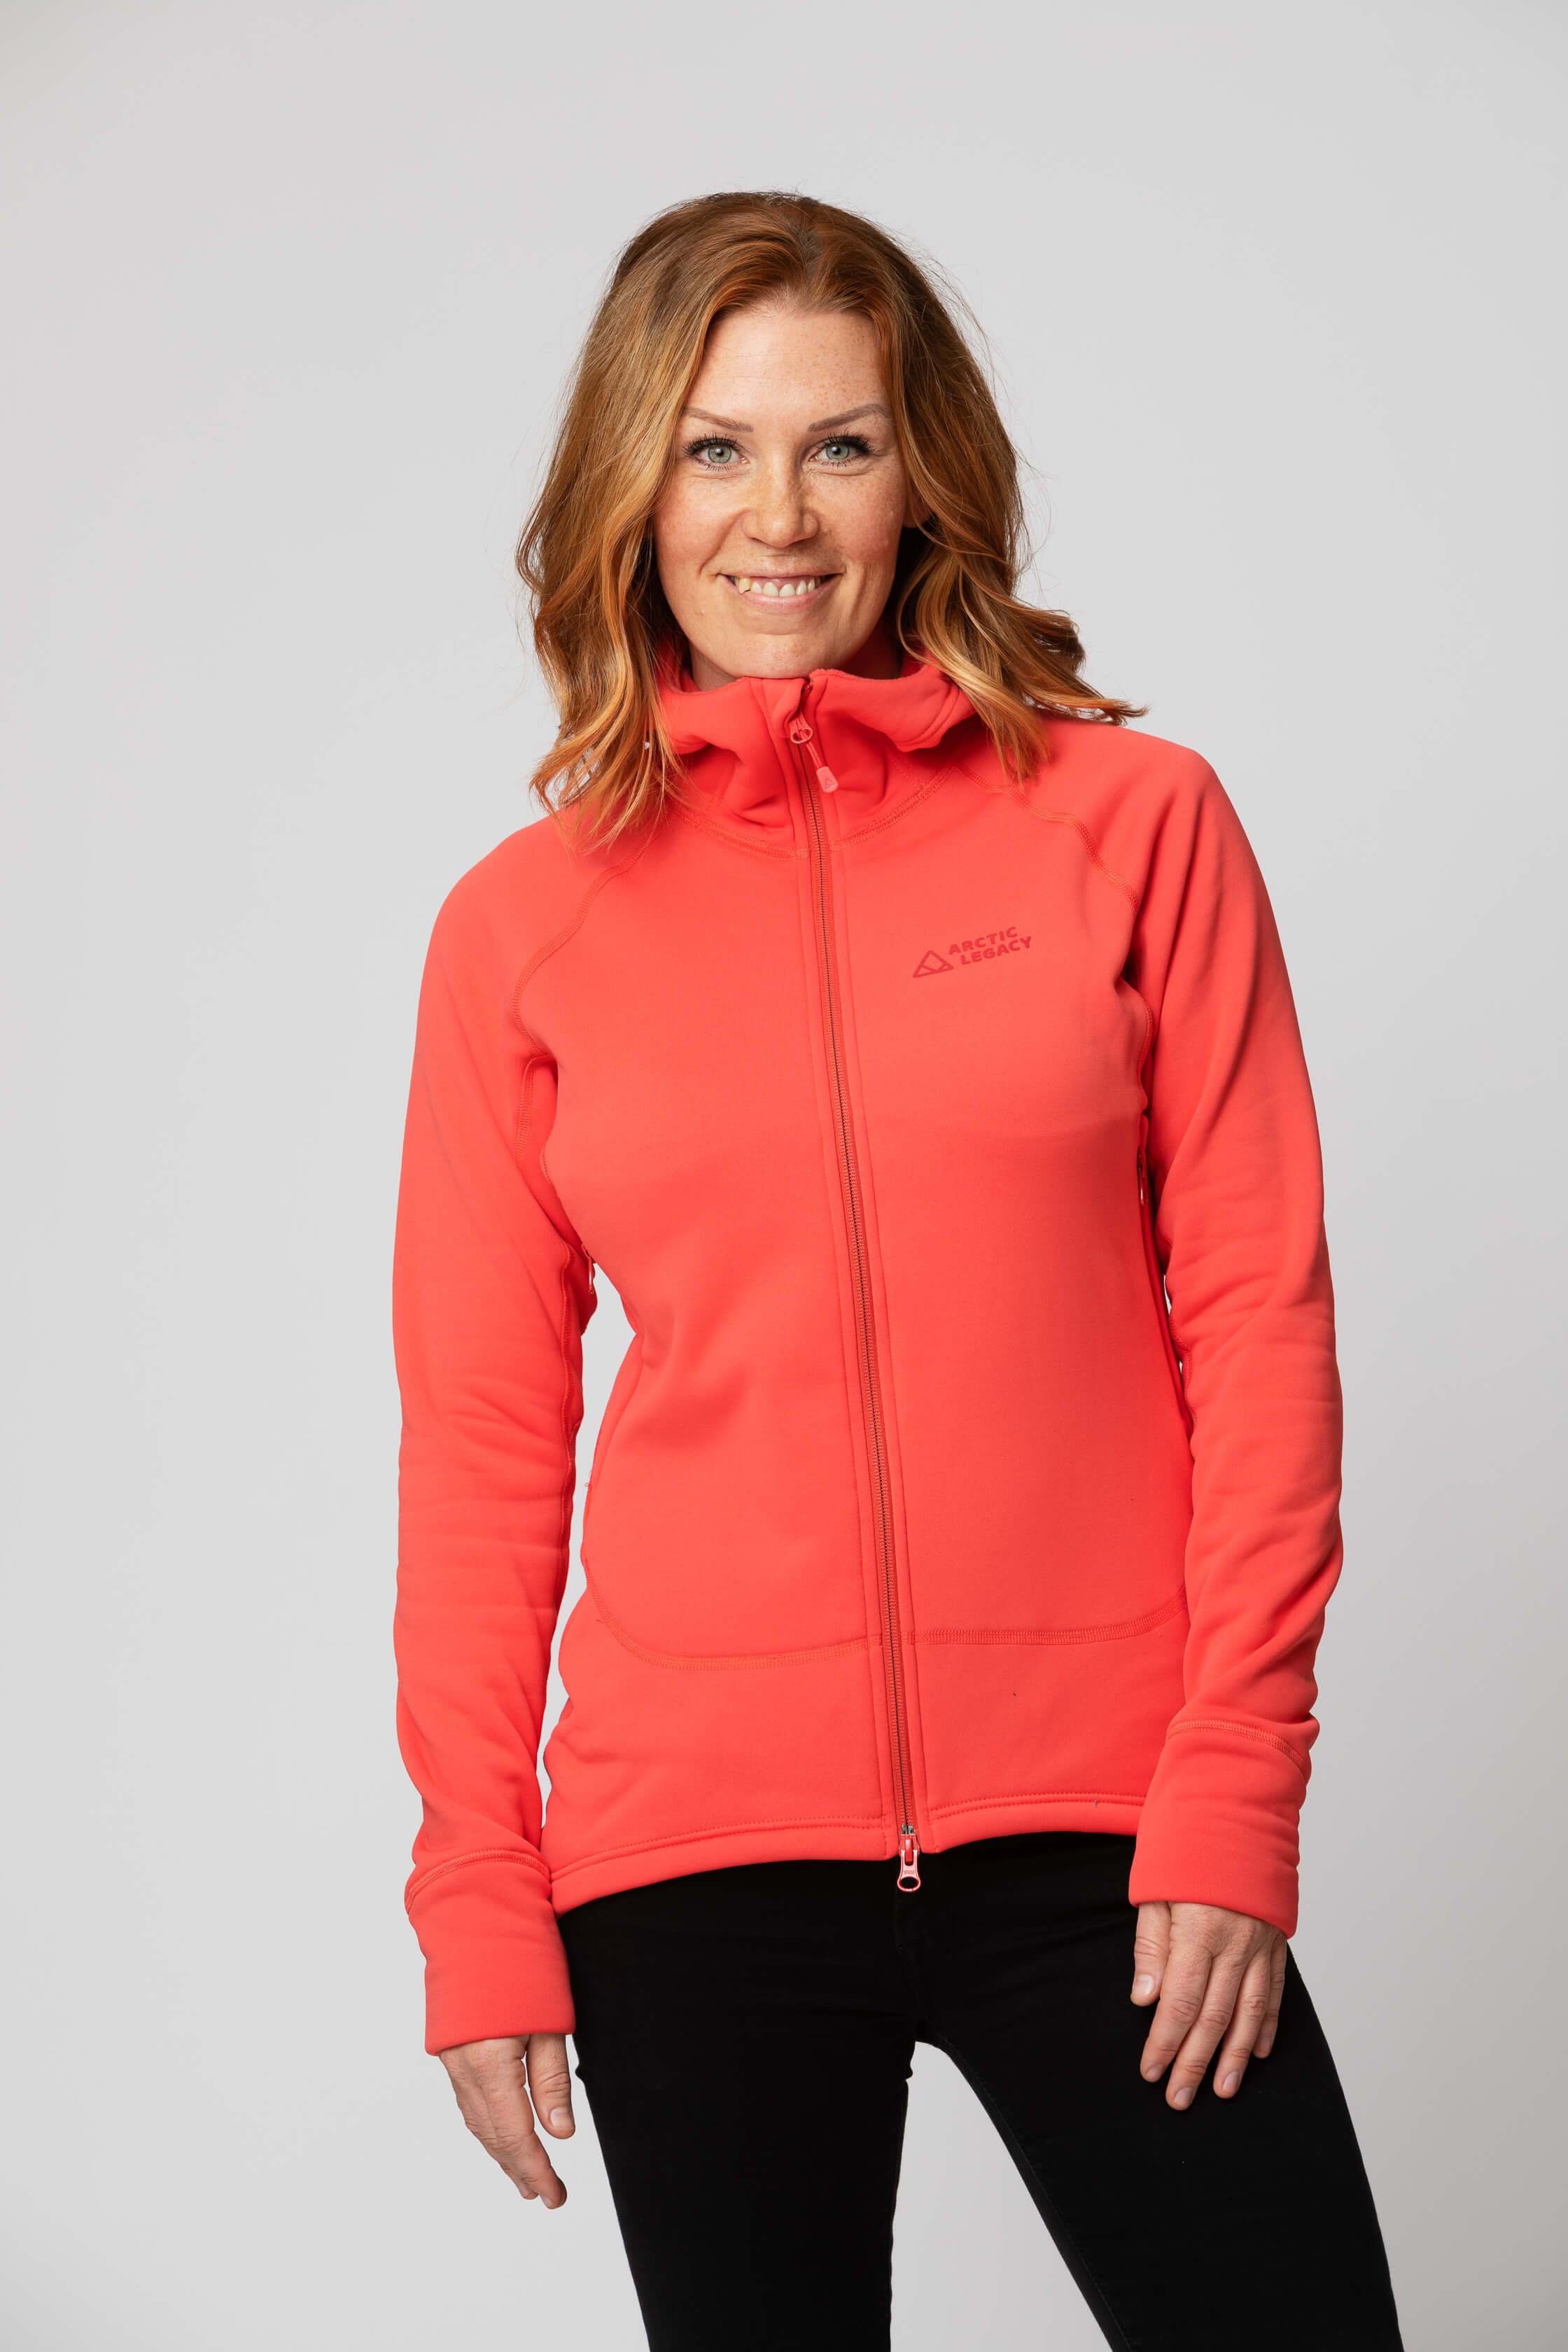 Women's pink red fleece jacket - front view of the Arctic Legacy Nanuk Pro Fleece Hoodie#color_cayenne